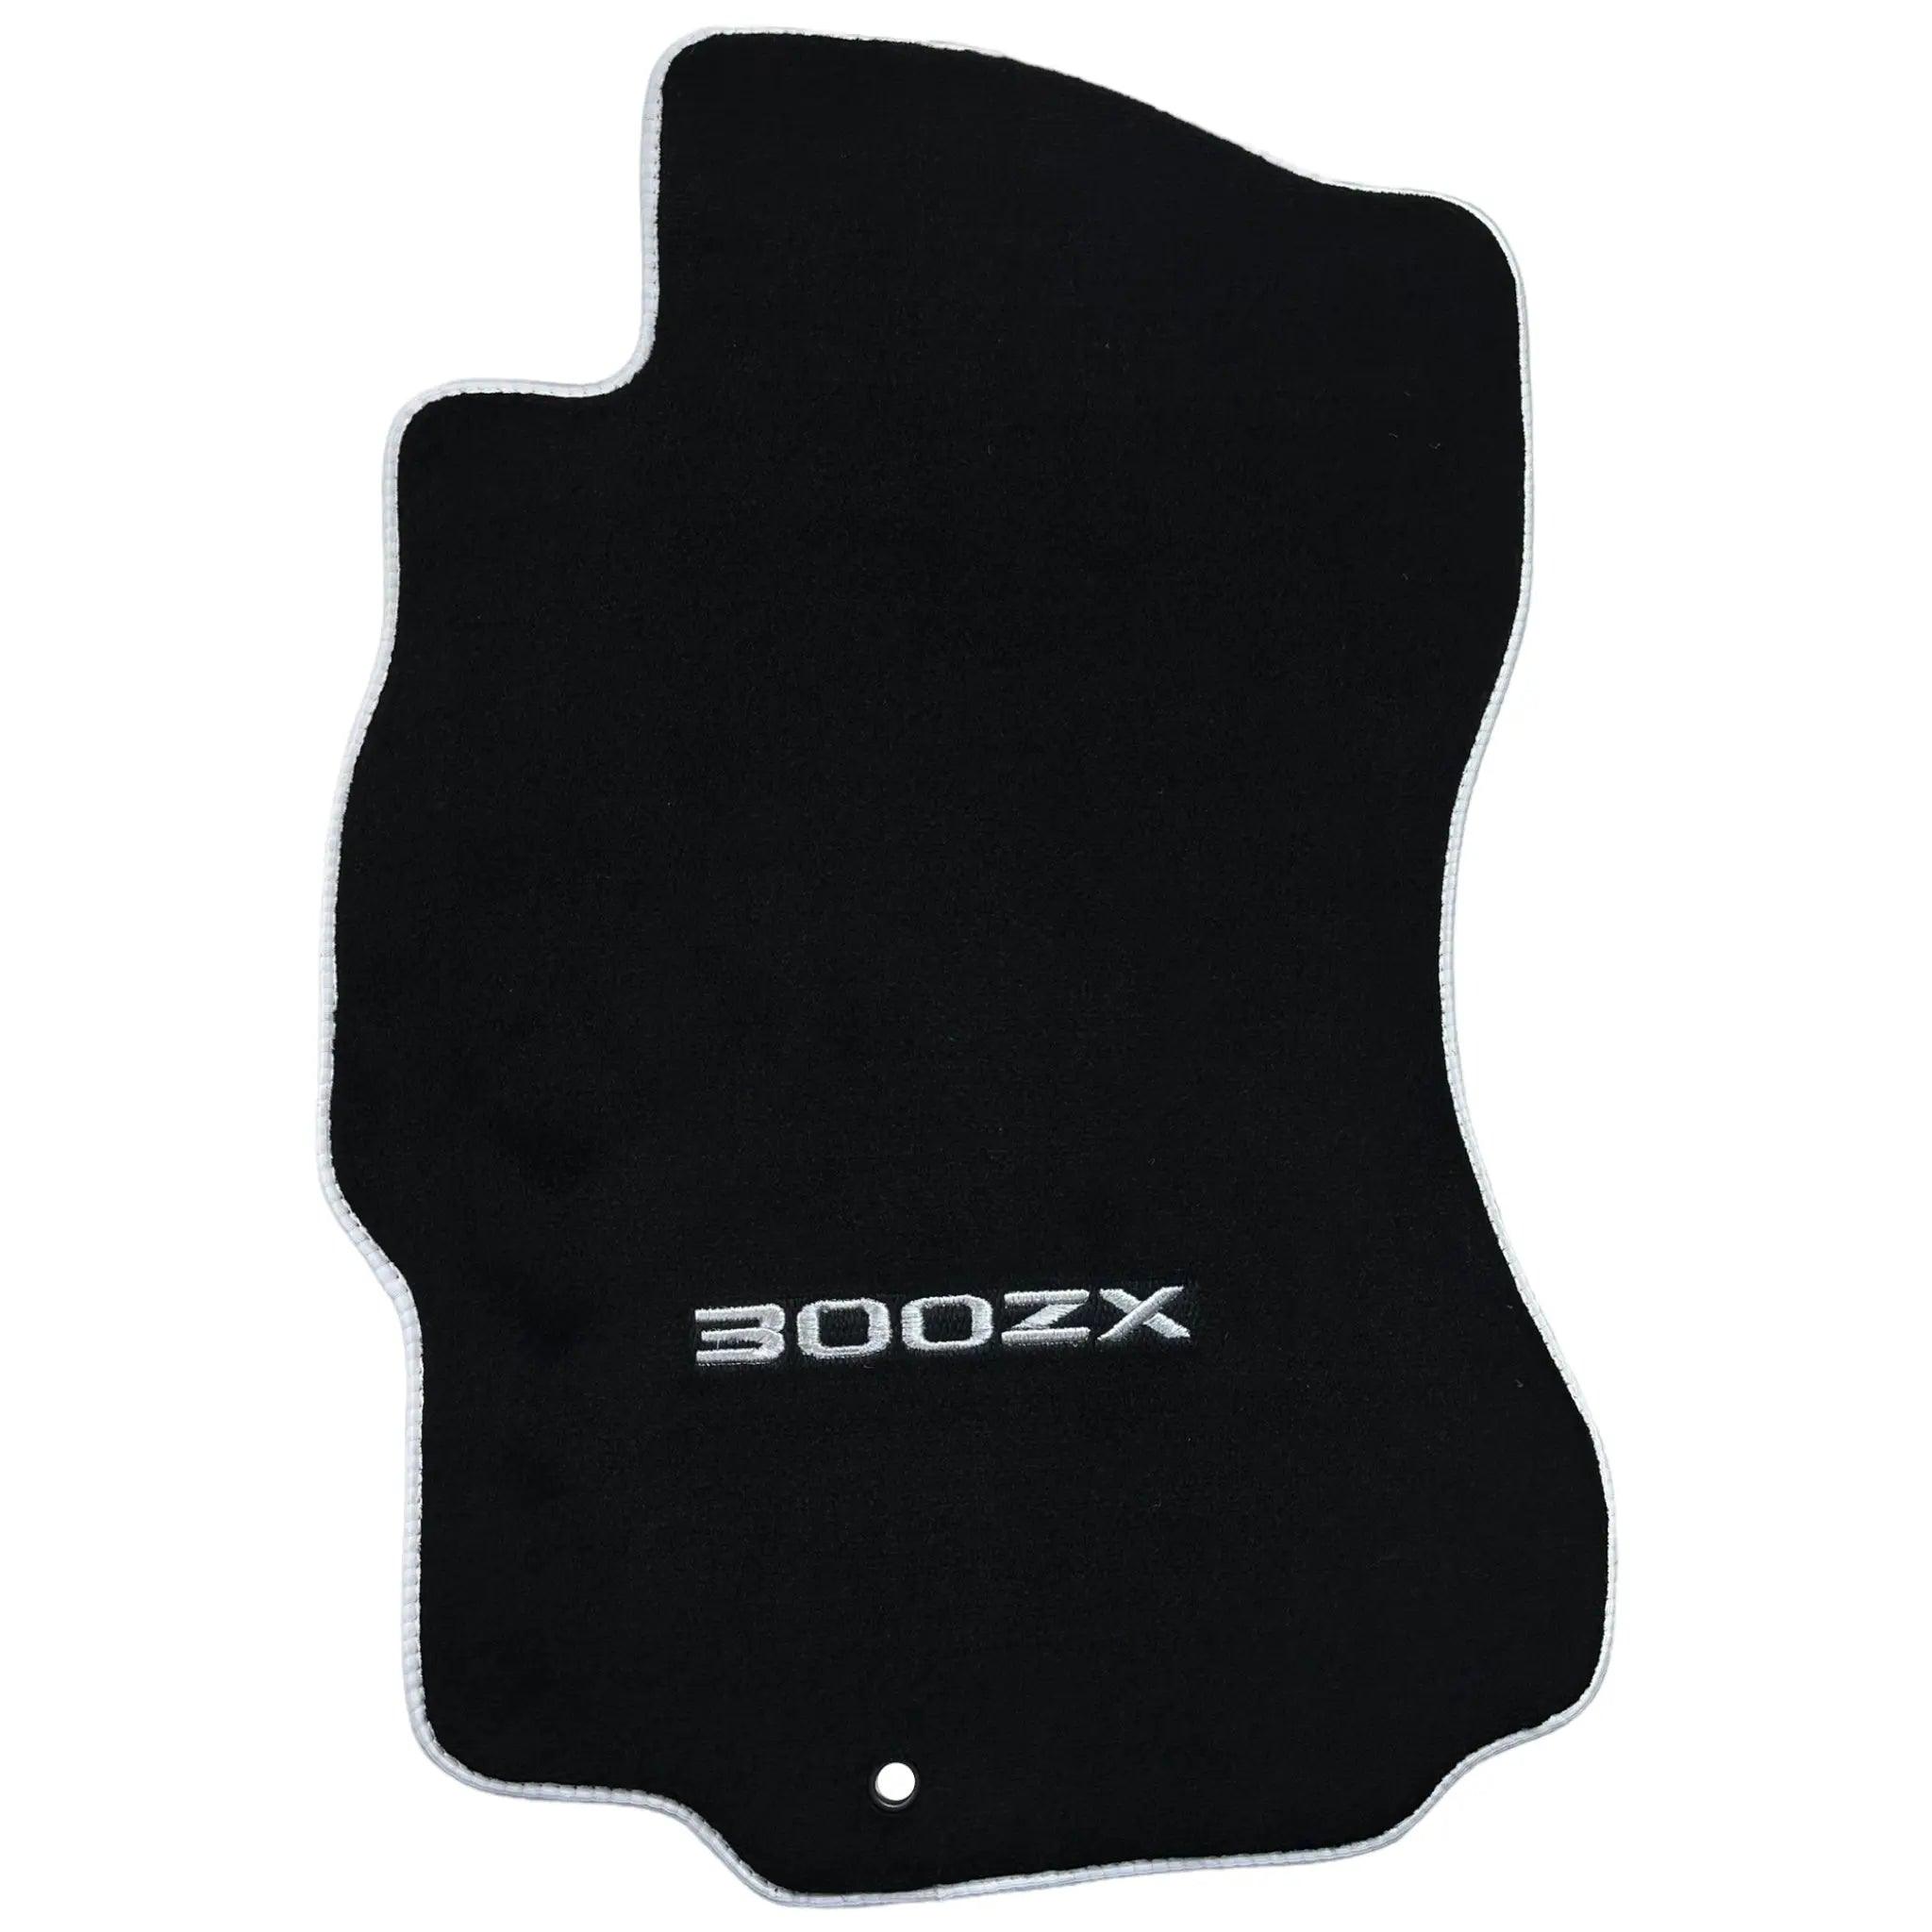 Black Floor Mats For Nissan 300ZX (1990-2000) with White Trim